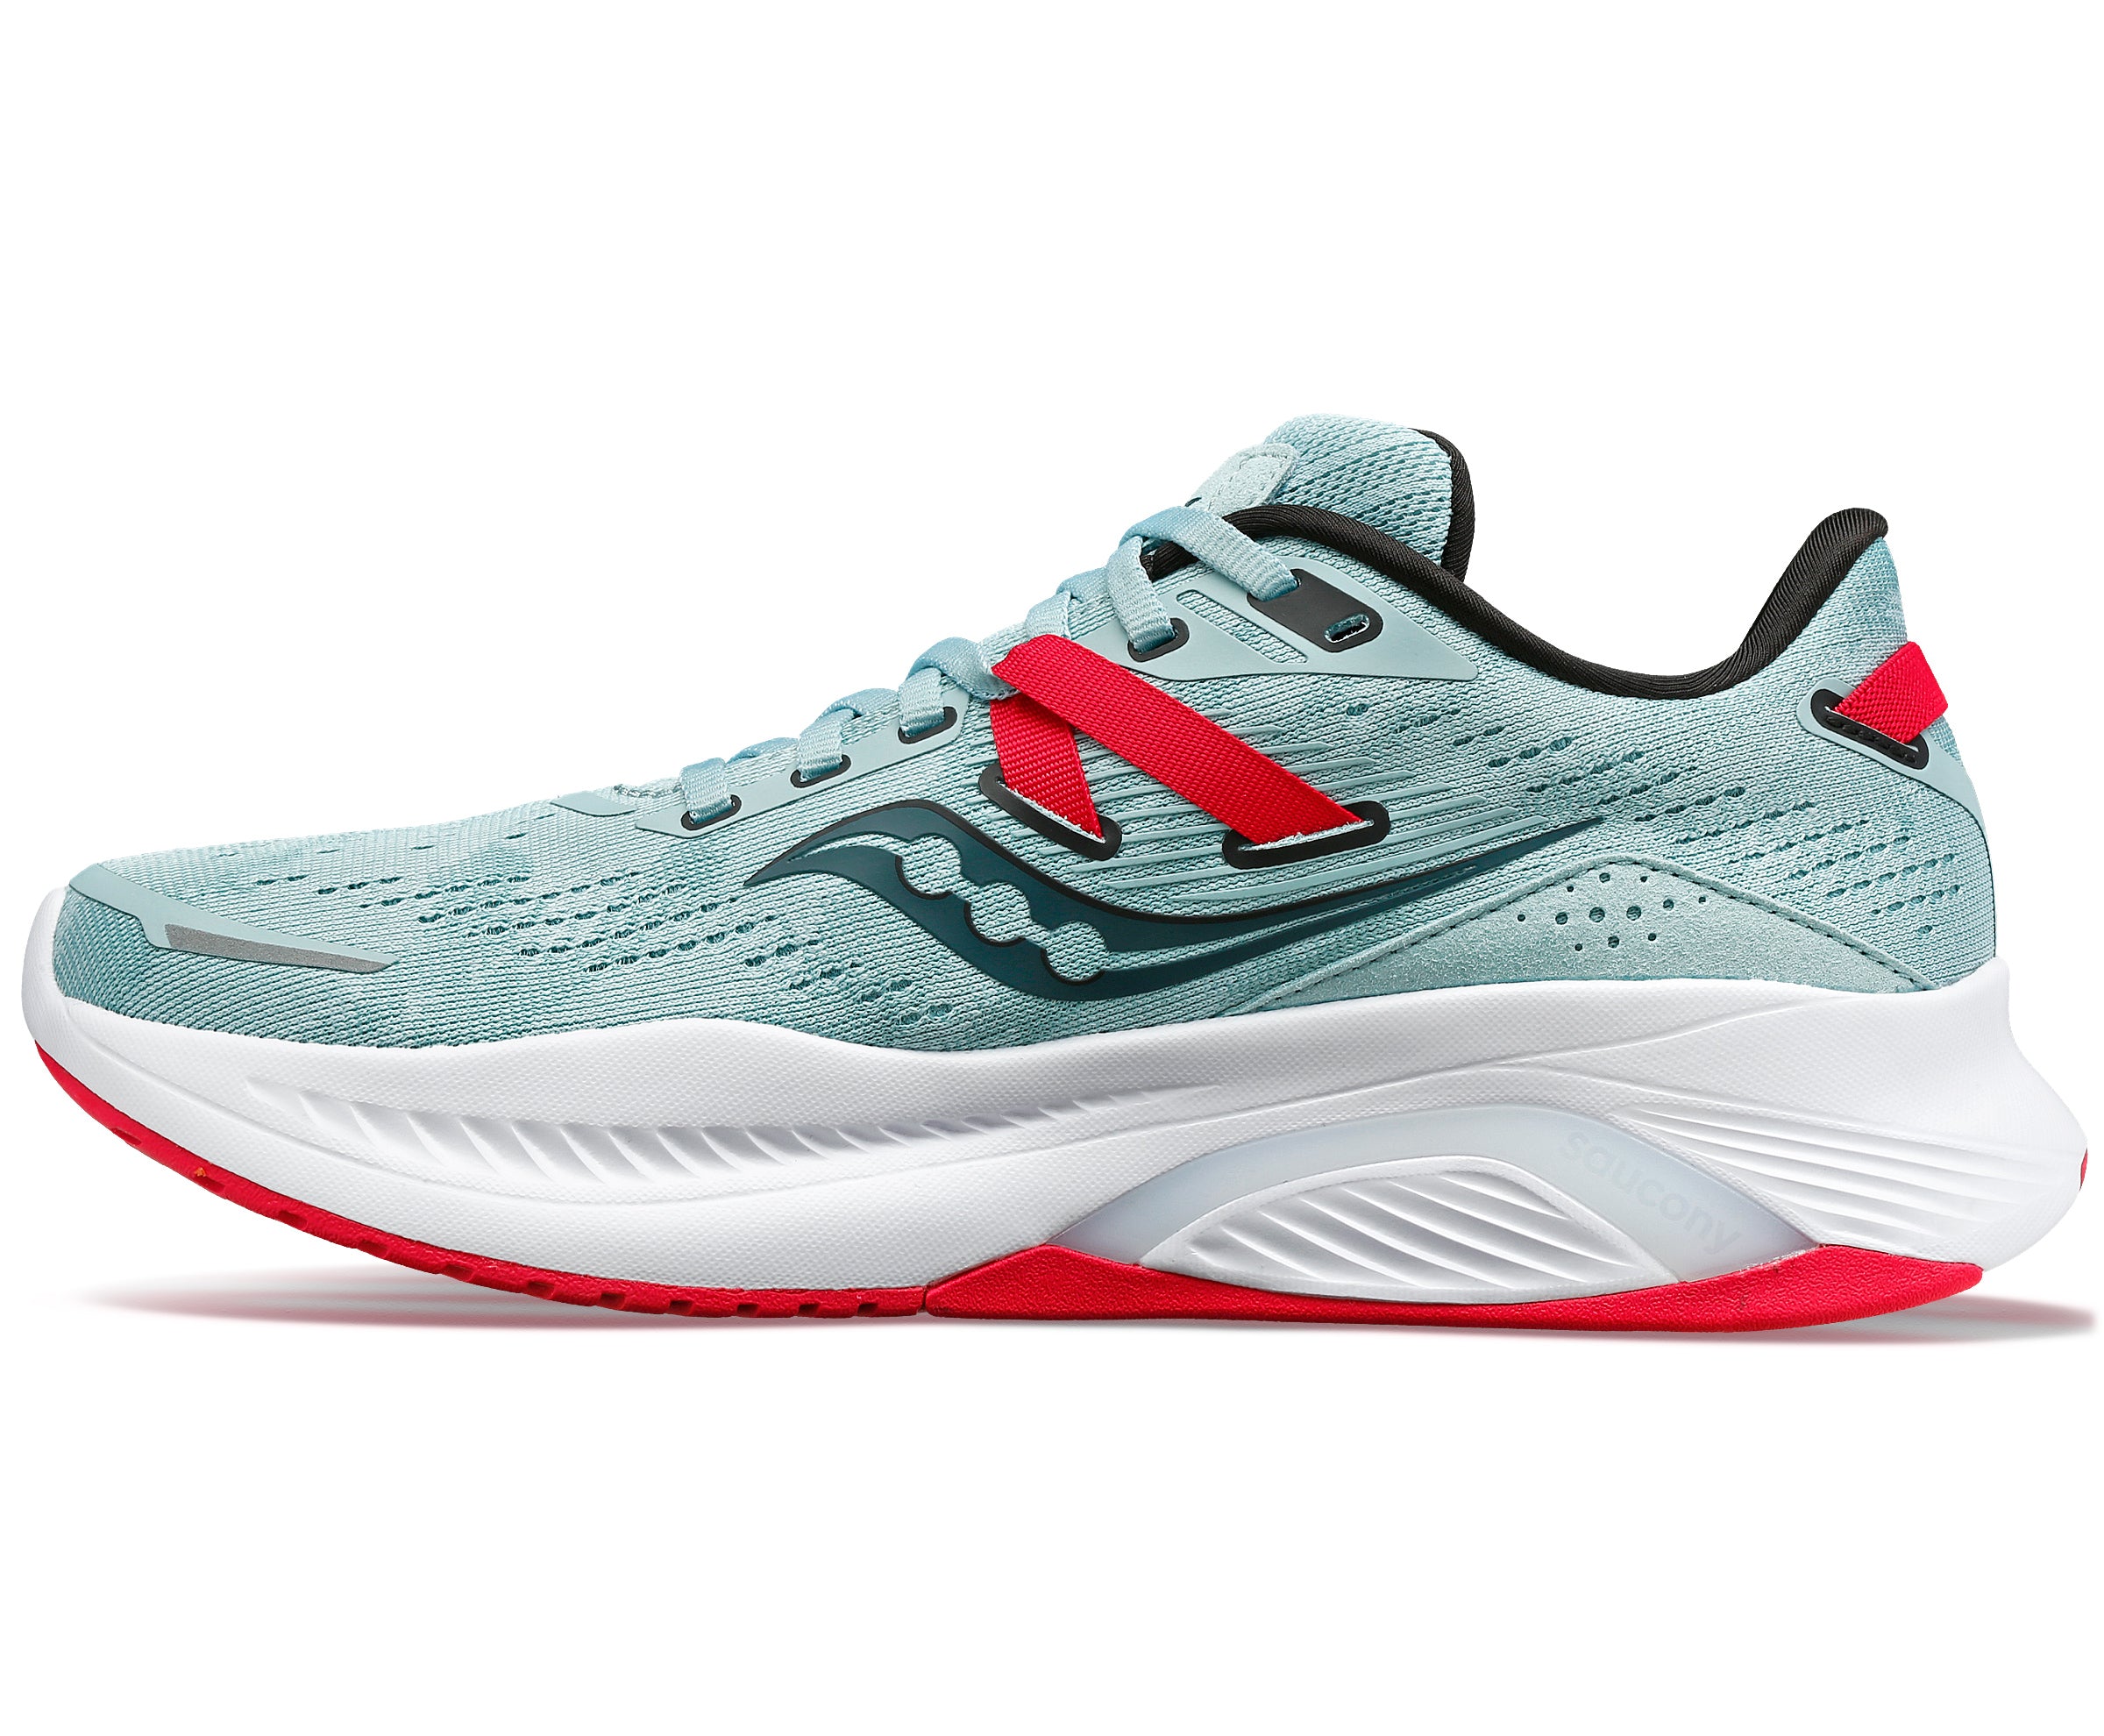 SAUCONY WOMEN'S GUIDE 16 - B - 16 MINERAL/ROSE 